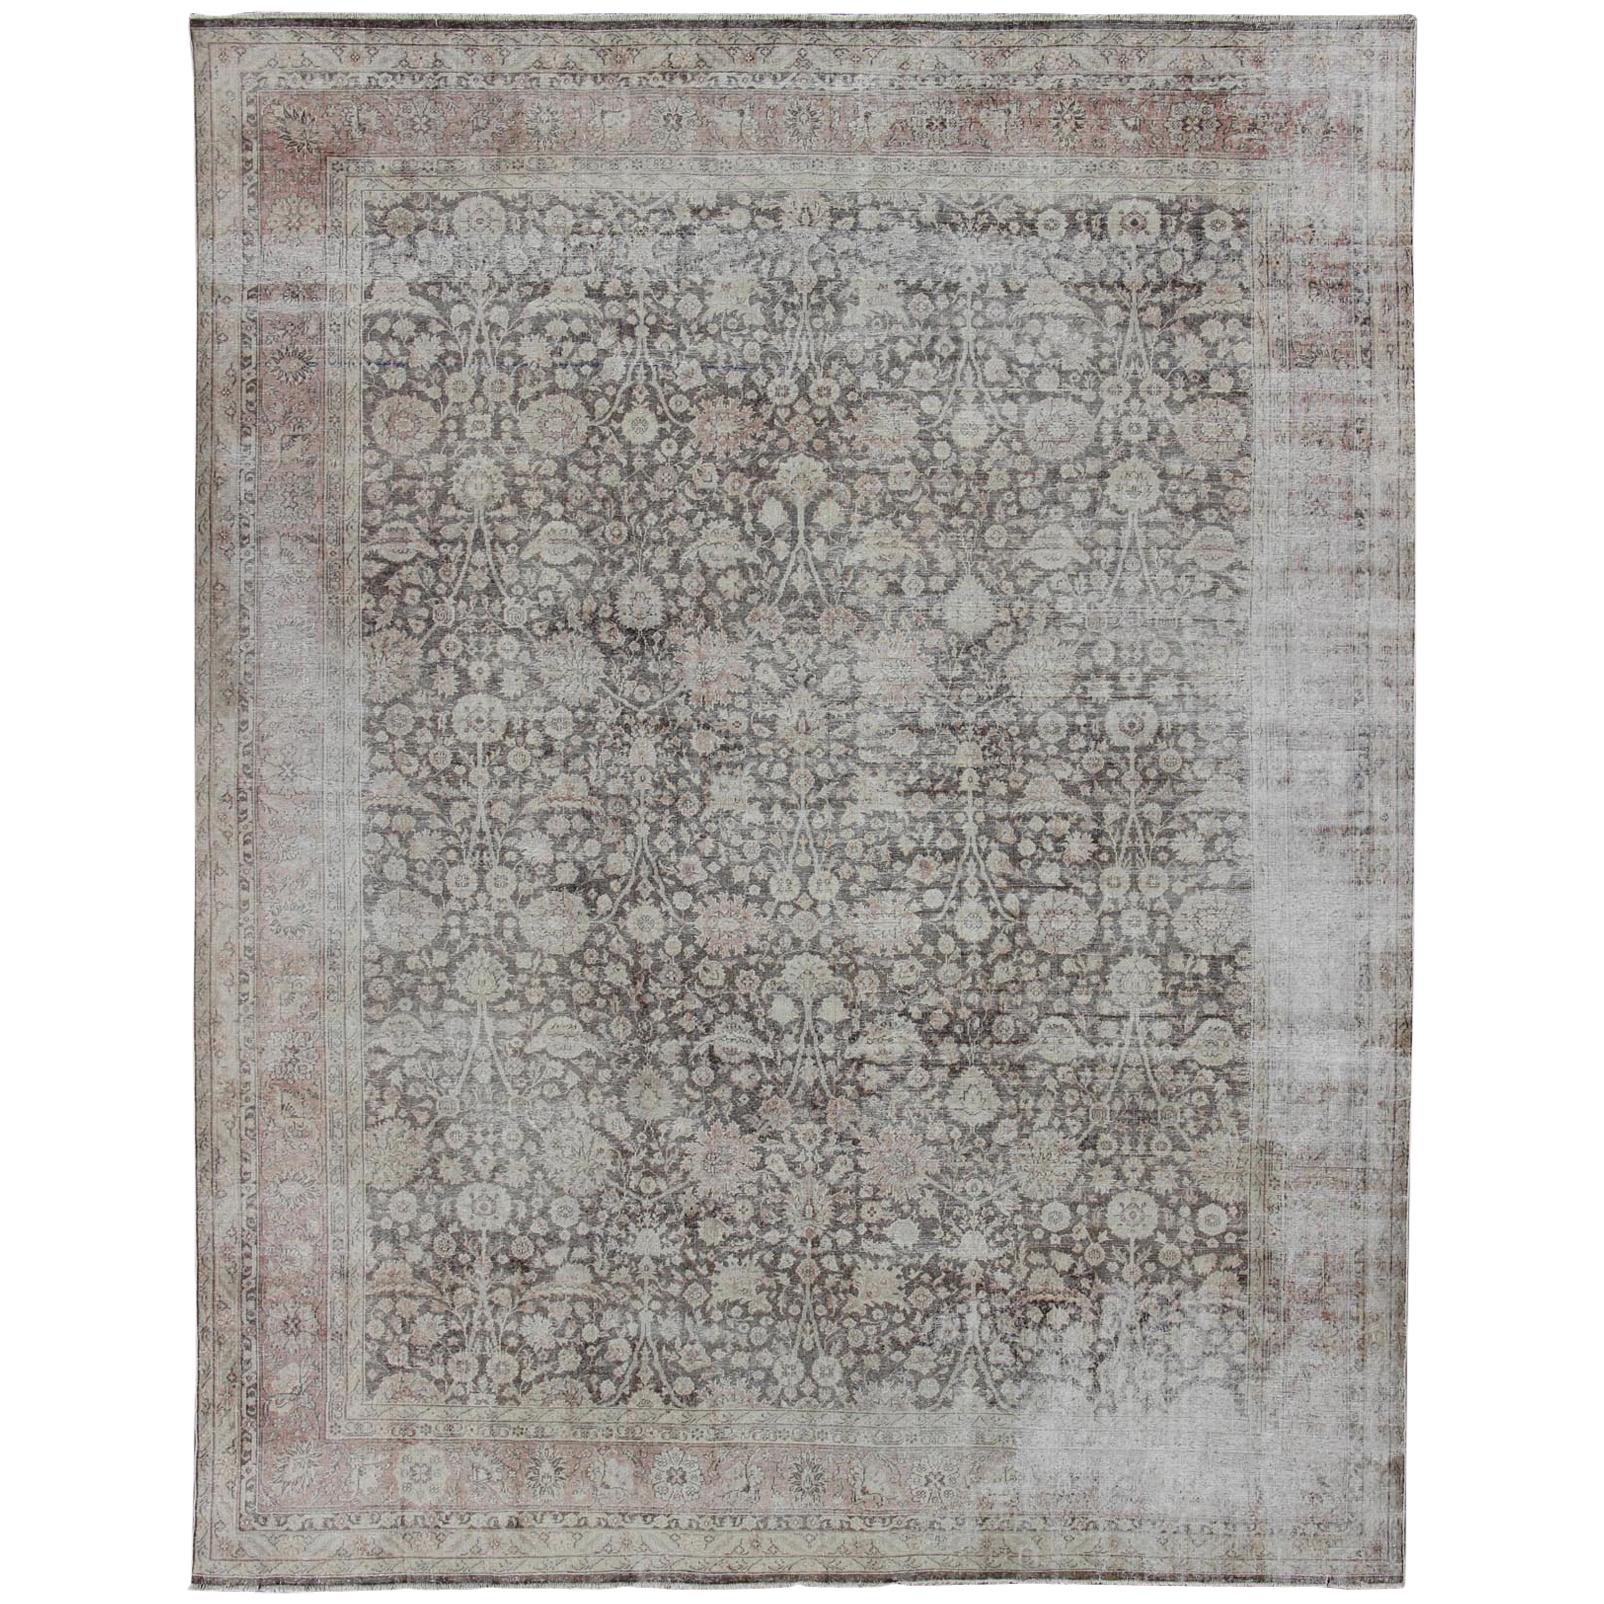 Antique Turkish Oushak Rug with All-Over Floral Design in Earth Tones For Sale